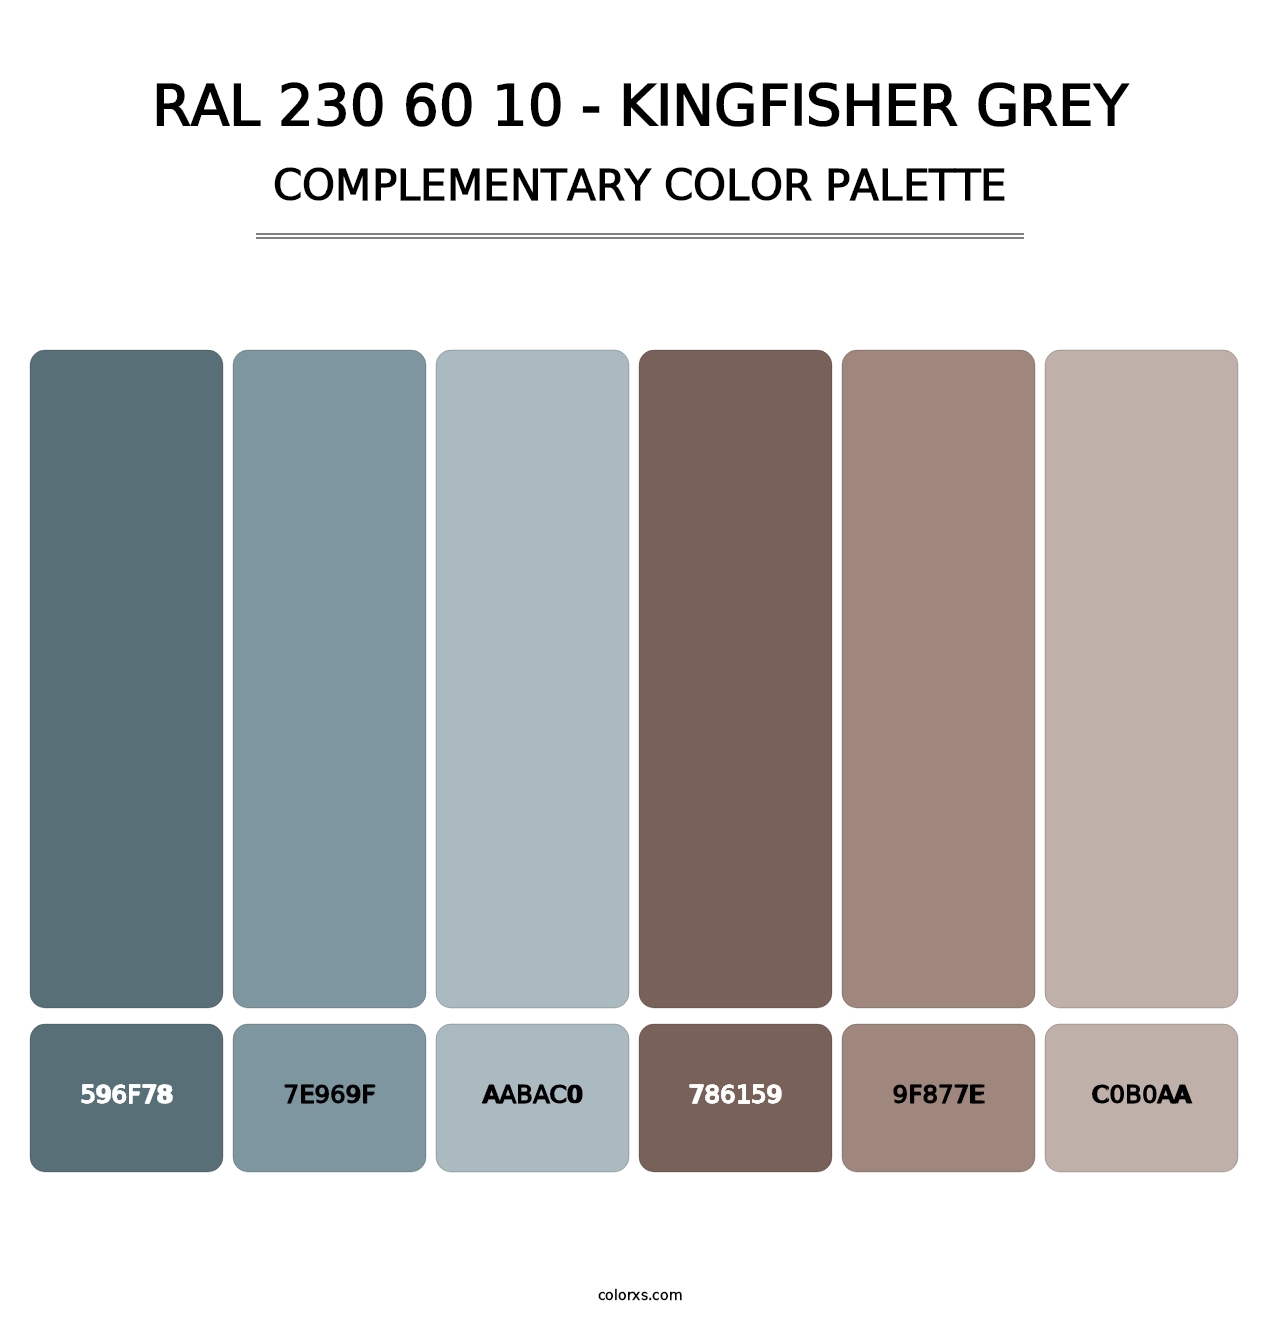 RAL 230 60 10 - Kingfisher Grey - Complementary Color Palette